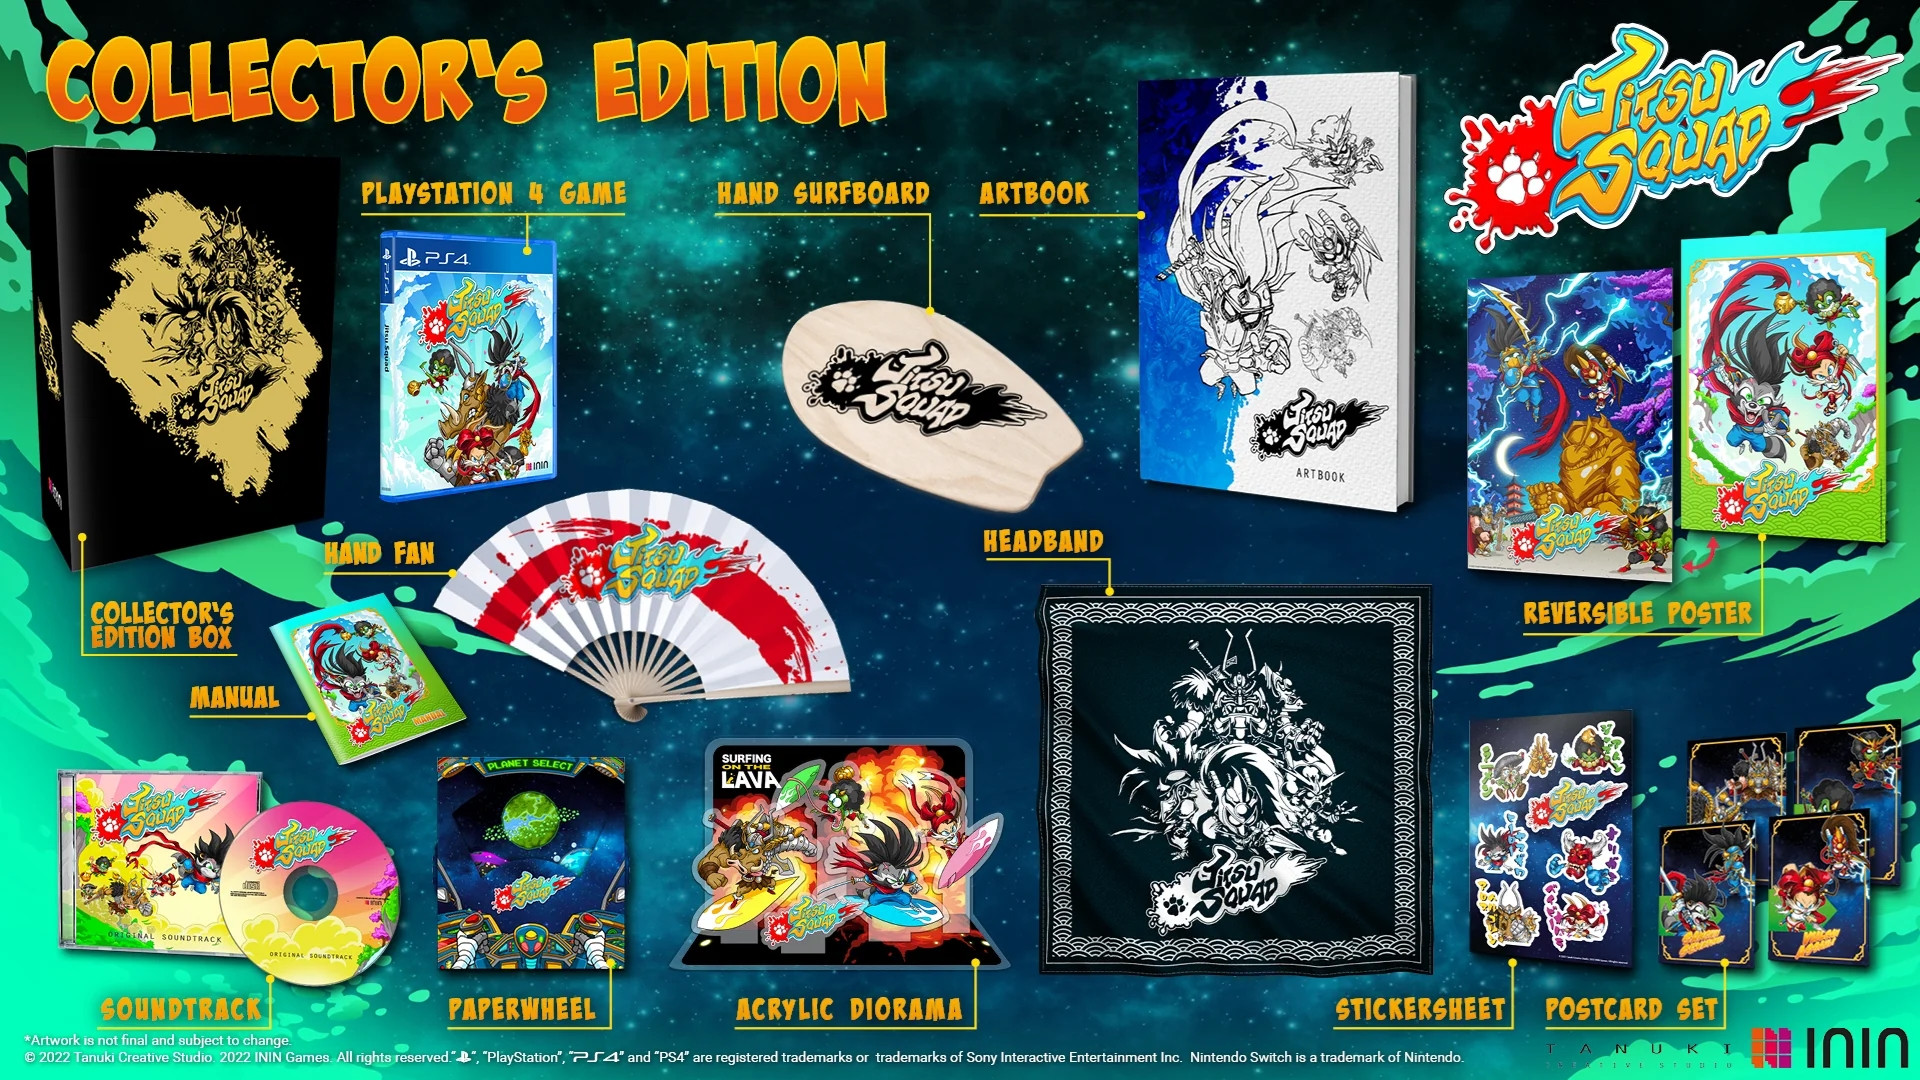 Jitsu Squad - Collector's Edition (Strictly Limited) (PS4), Inin Games